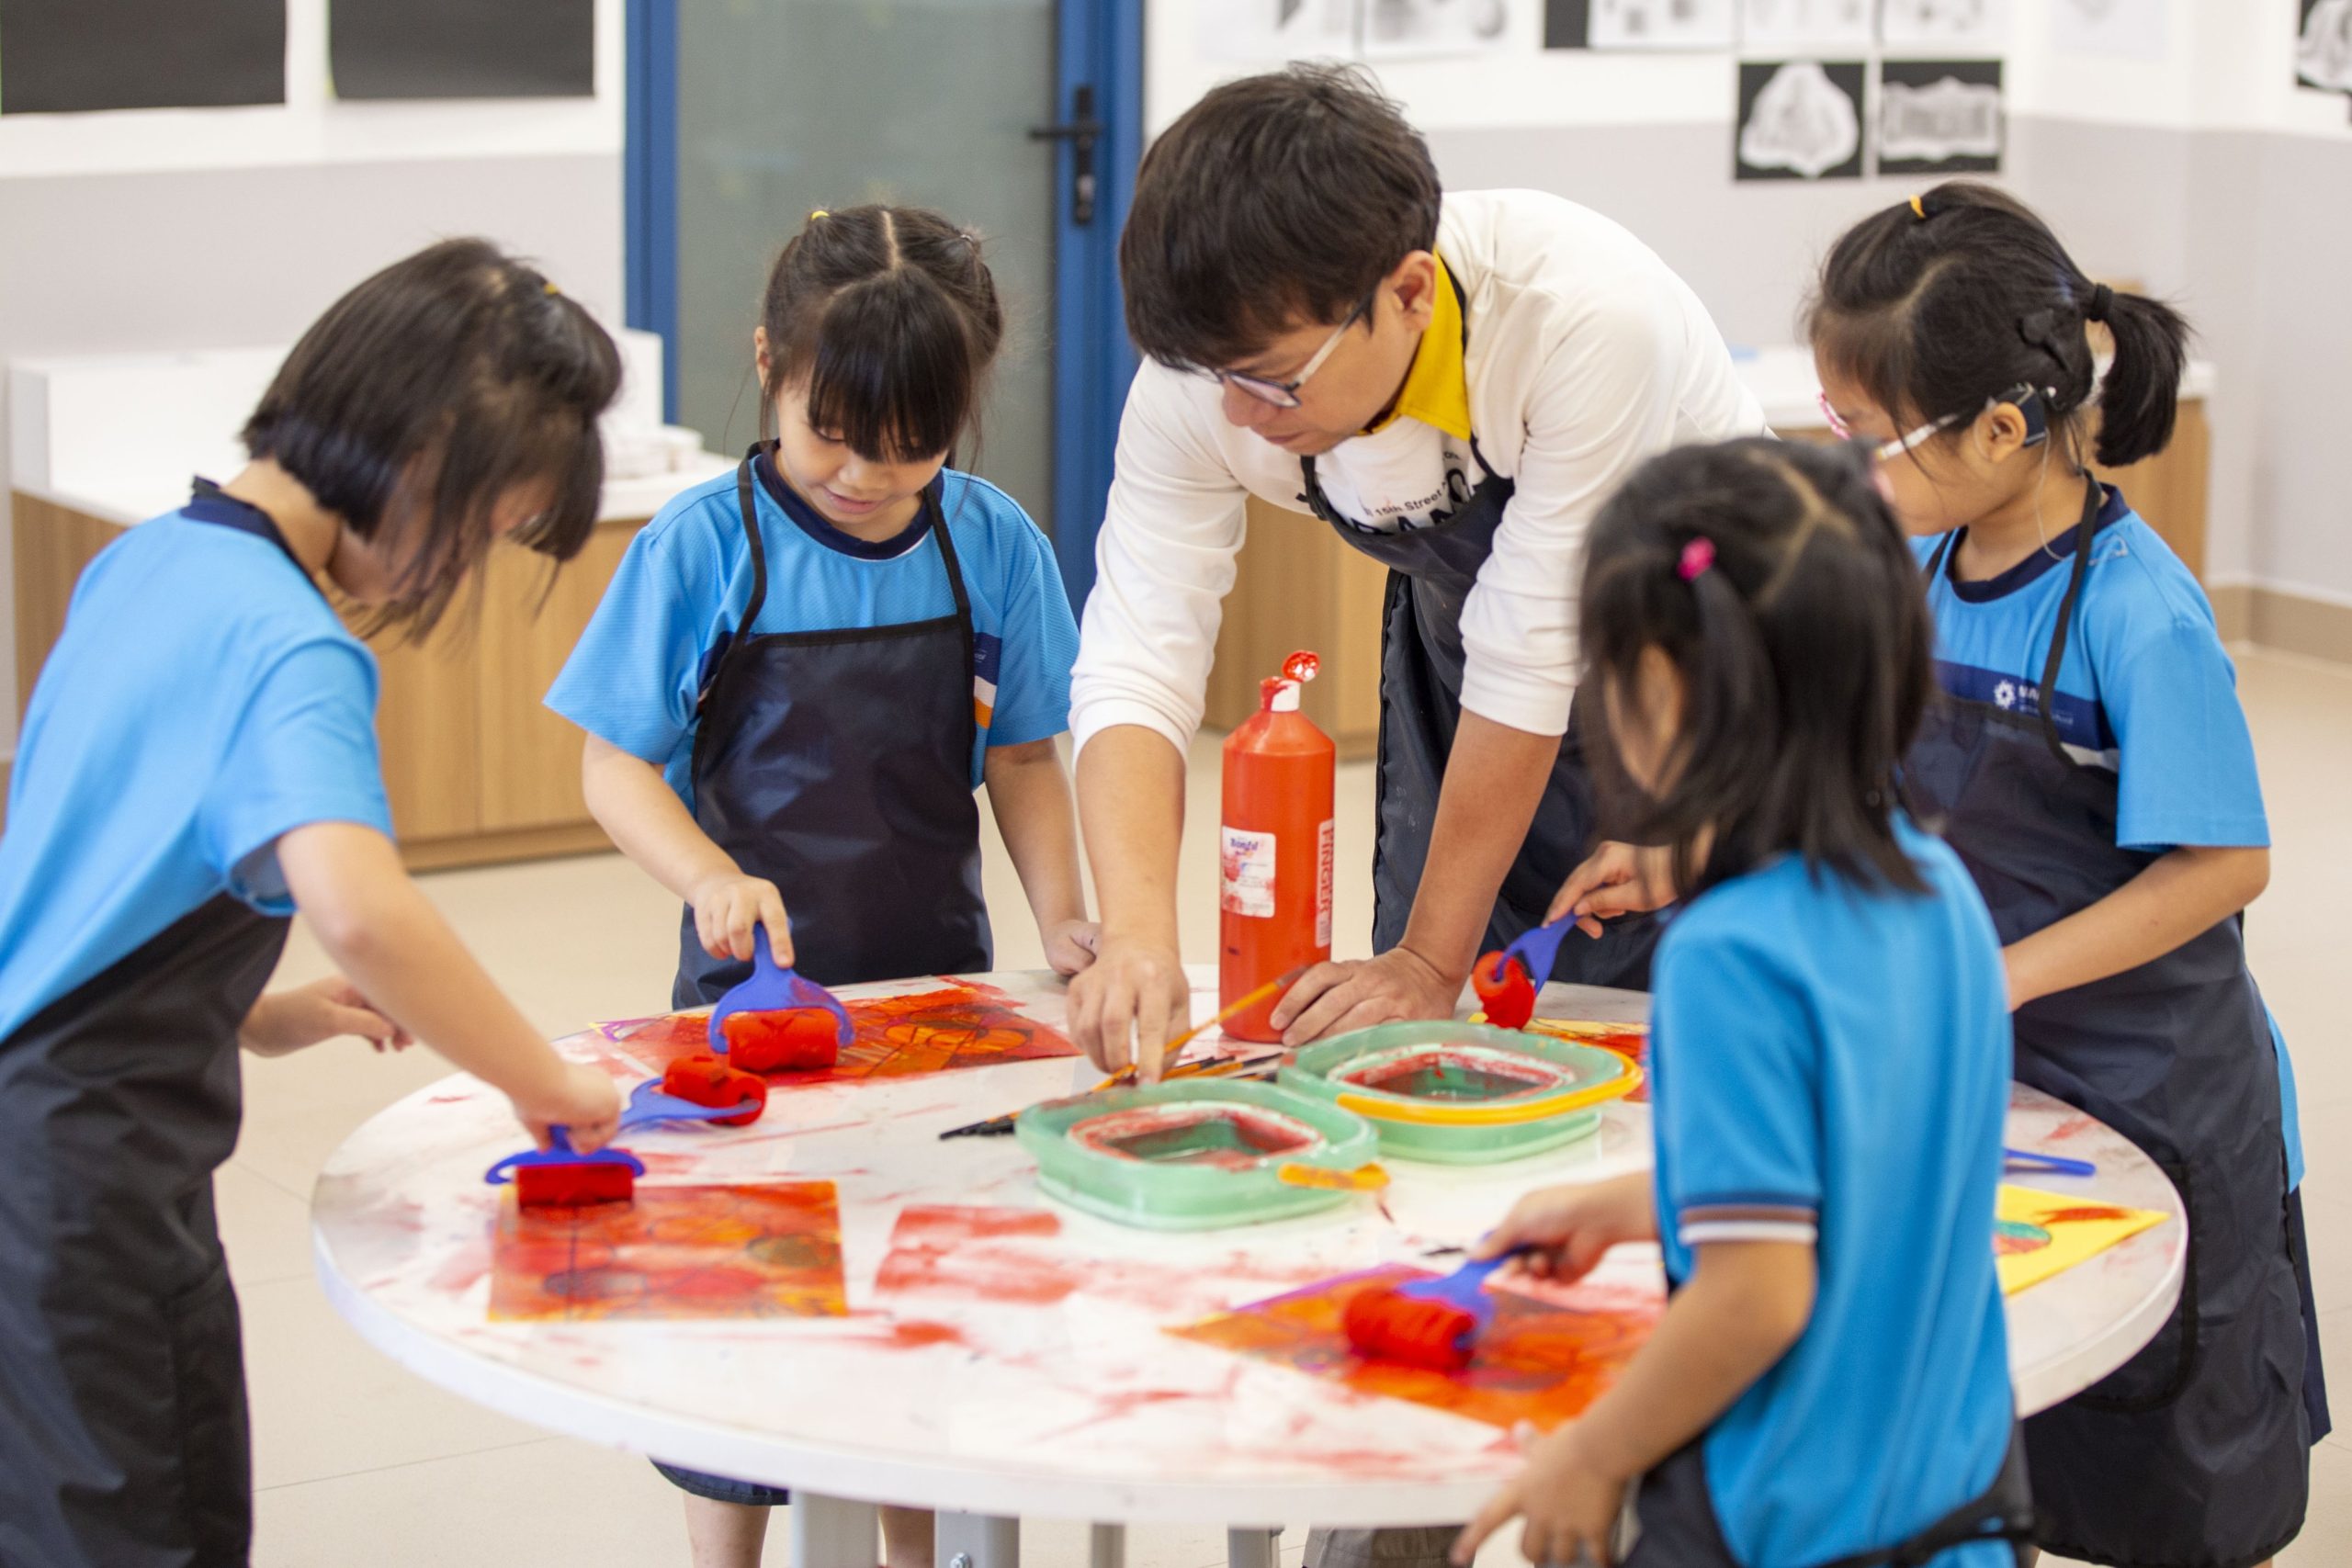 Art: Children can freely make a mess, find creative ways to paint and make their imaginations come alive